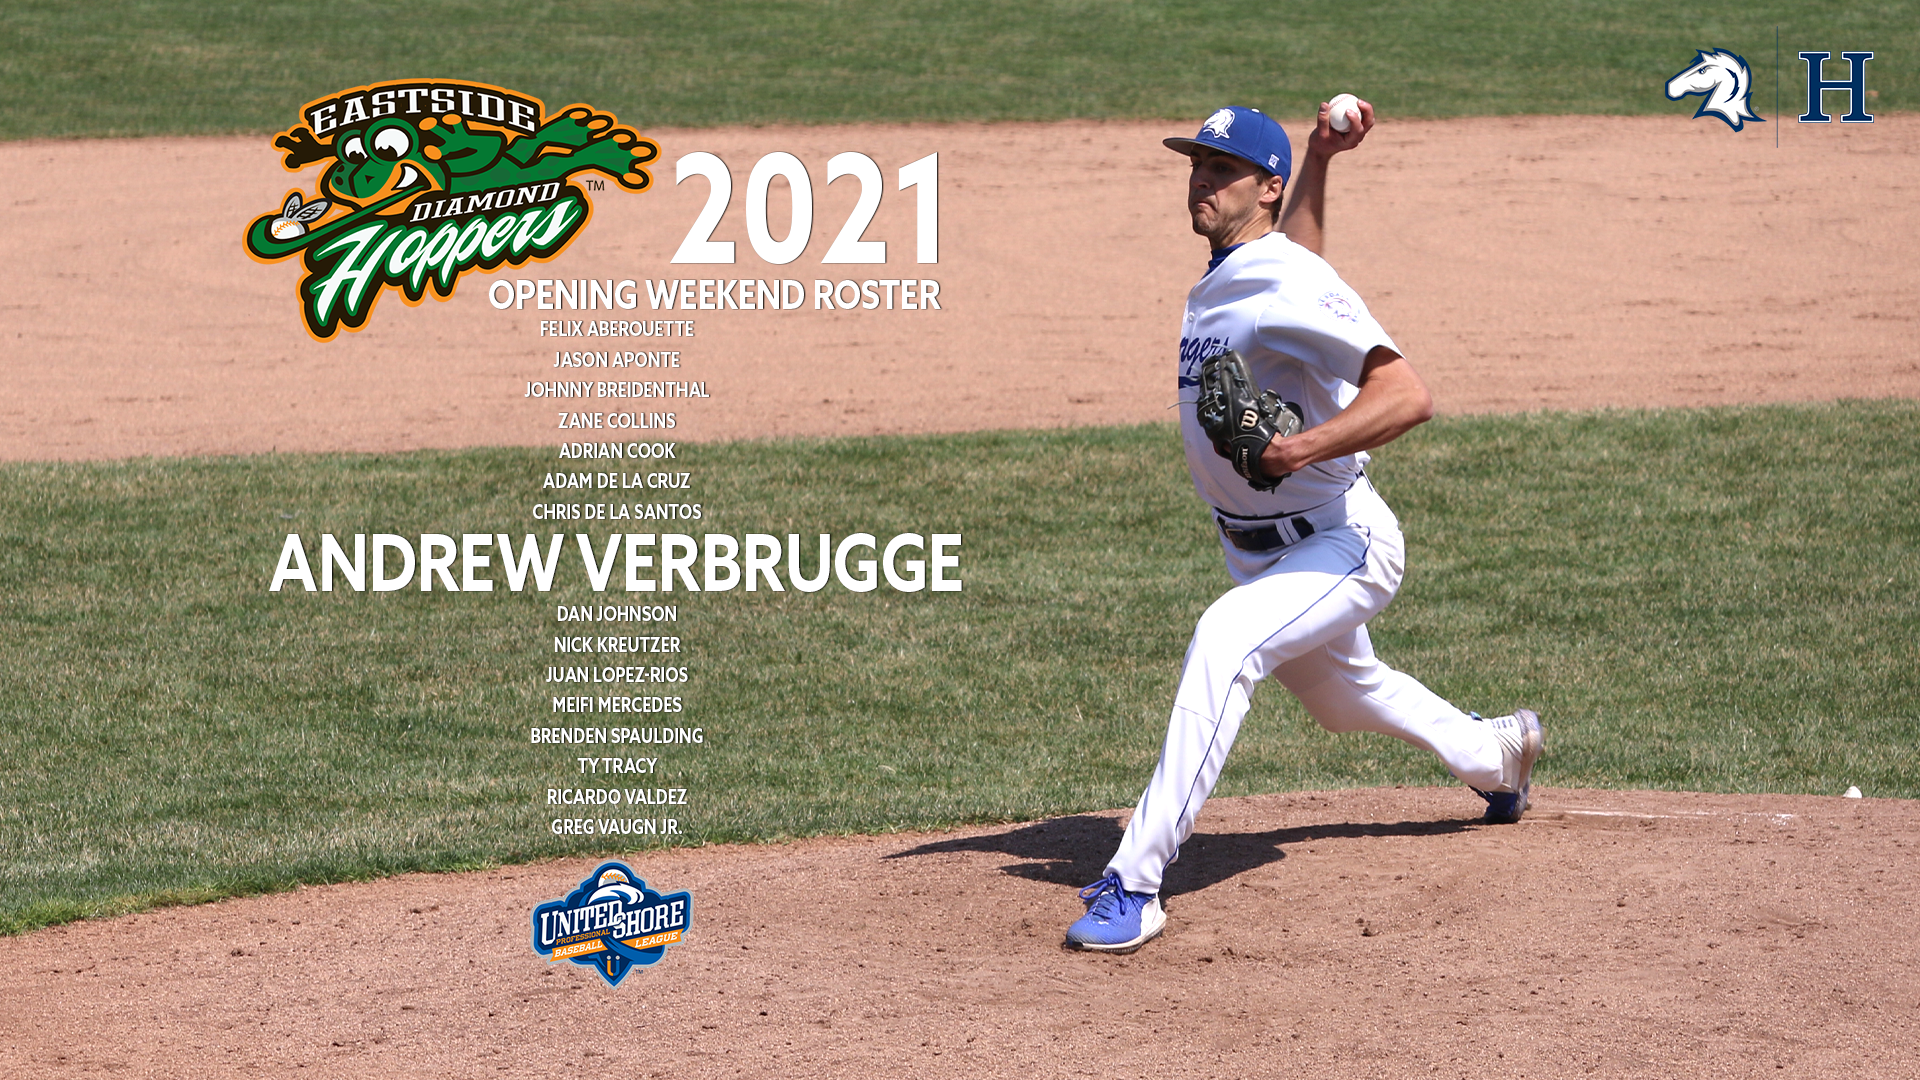 Charger graduate Andrew Verbrugge signs with USPBL club for summer season